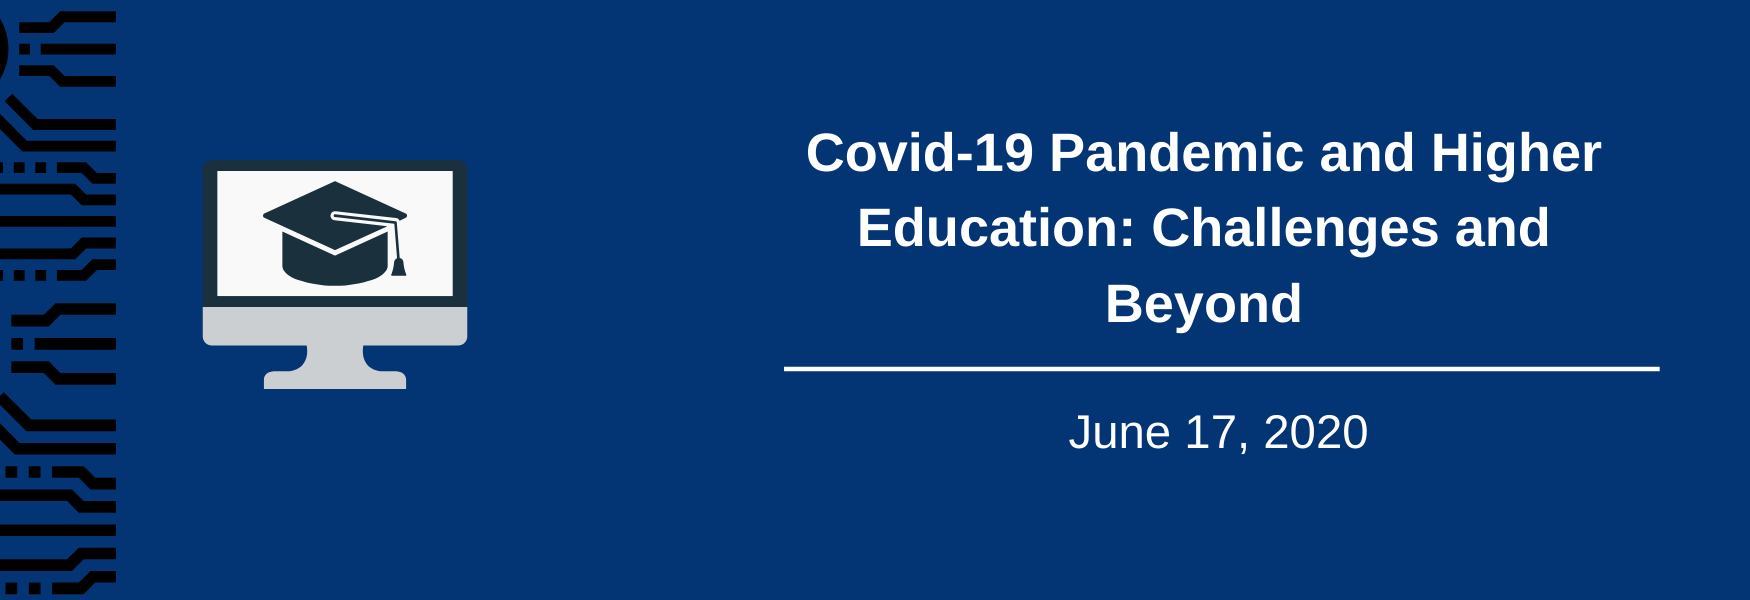 Covid-19 Pandemic and Higher Education: Challenges and Beyond